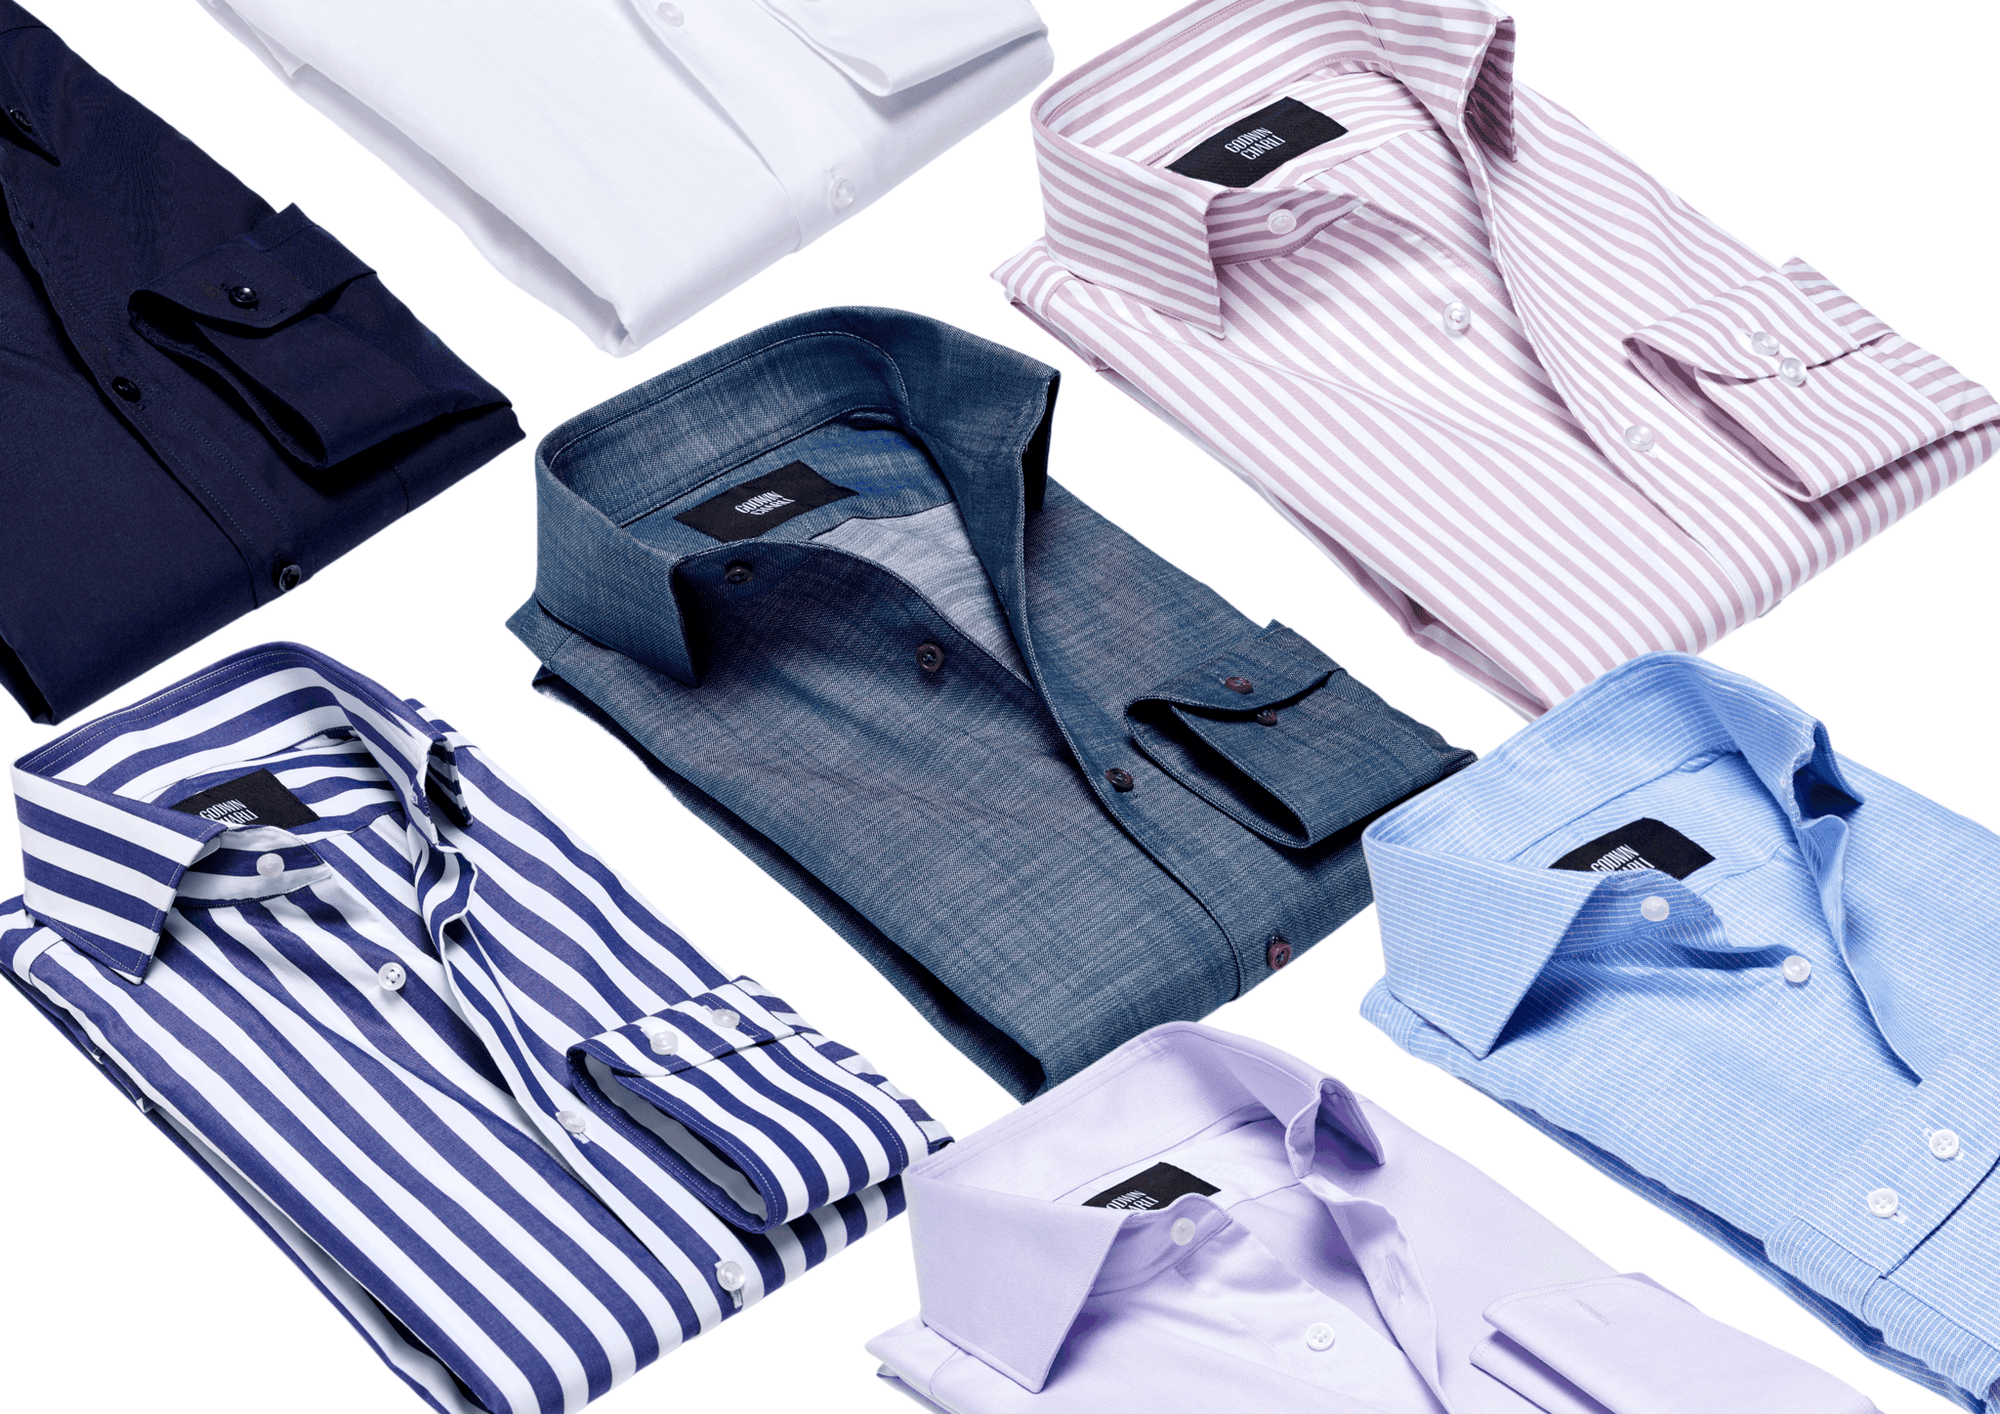 Everything About Dress Shirts, Collars, and Cuffs